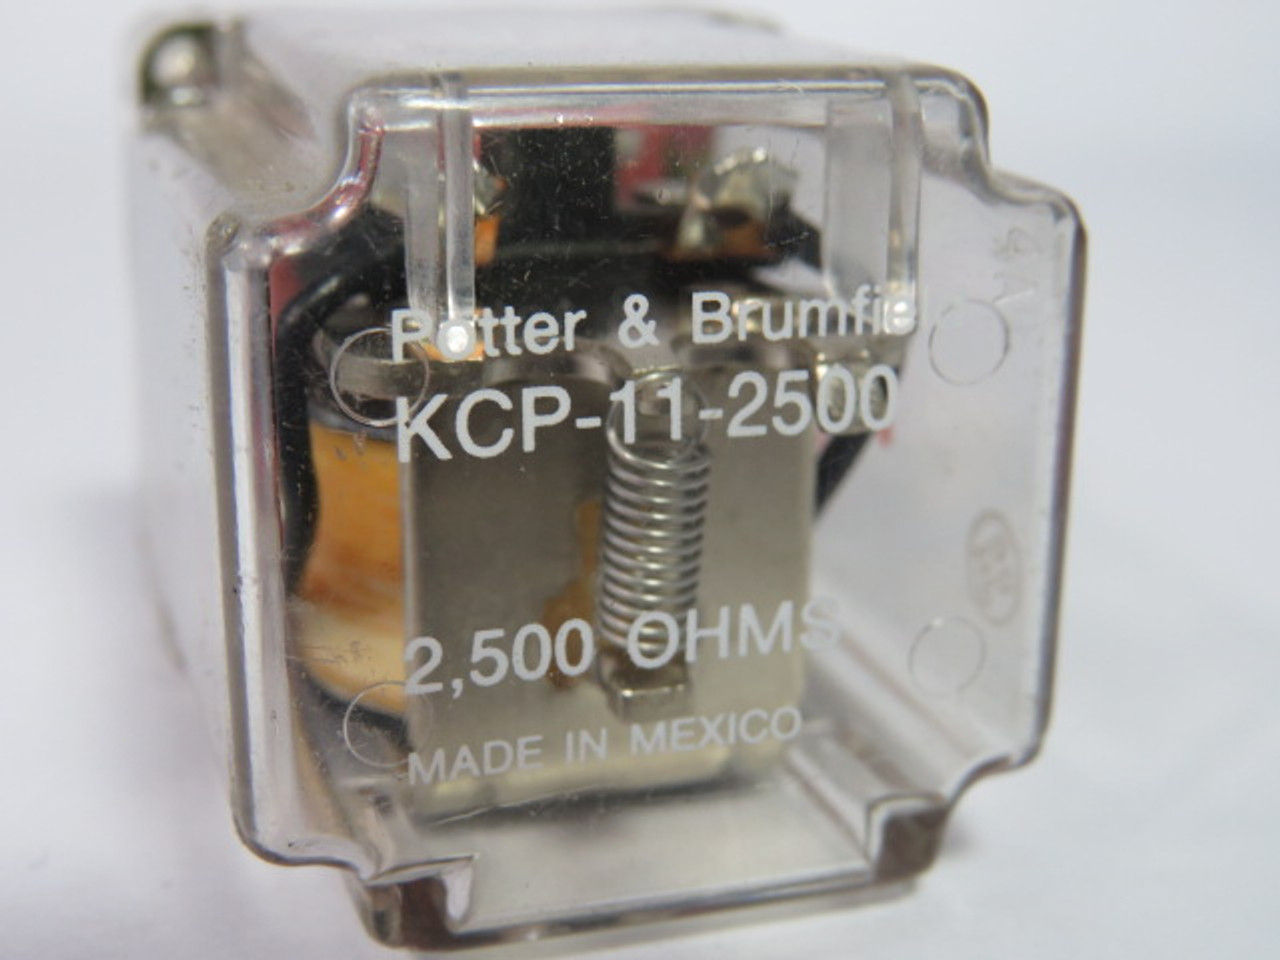 Potter & Brumfield KCP-11-2500 Relay 2500 Ohm USED